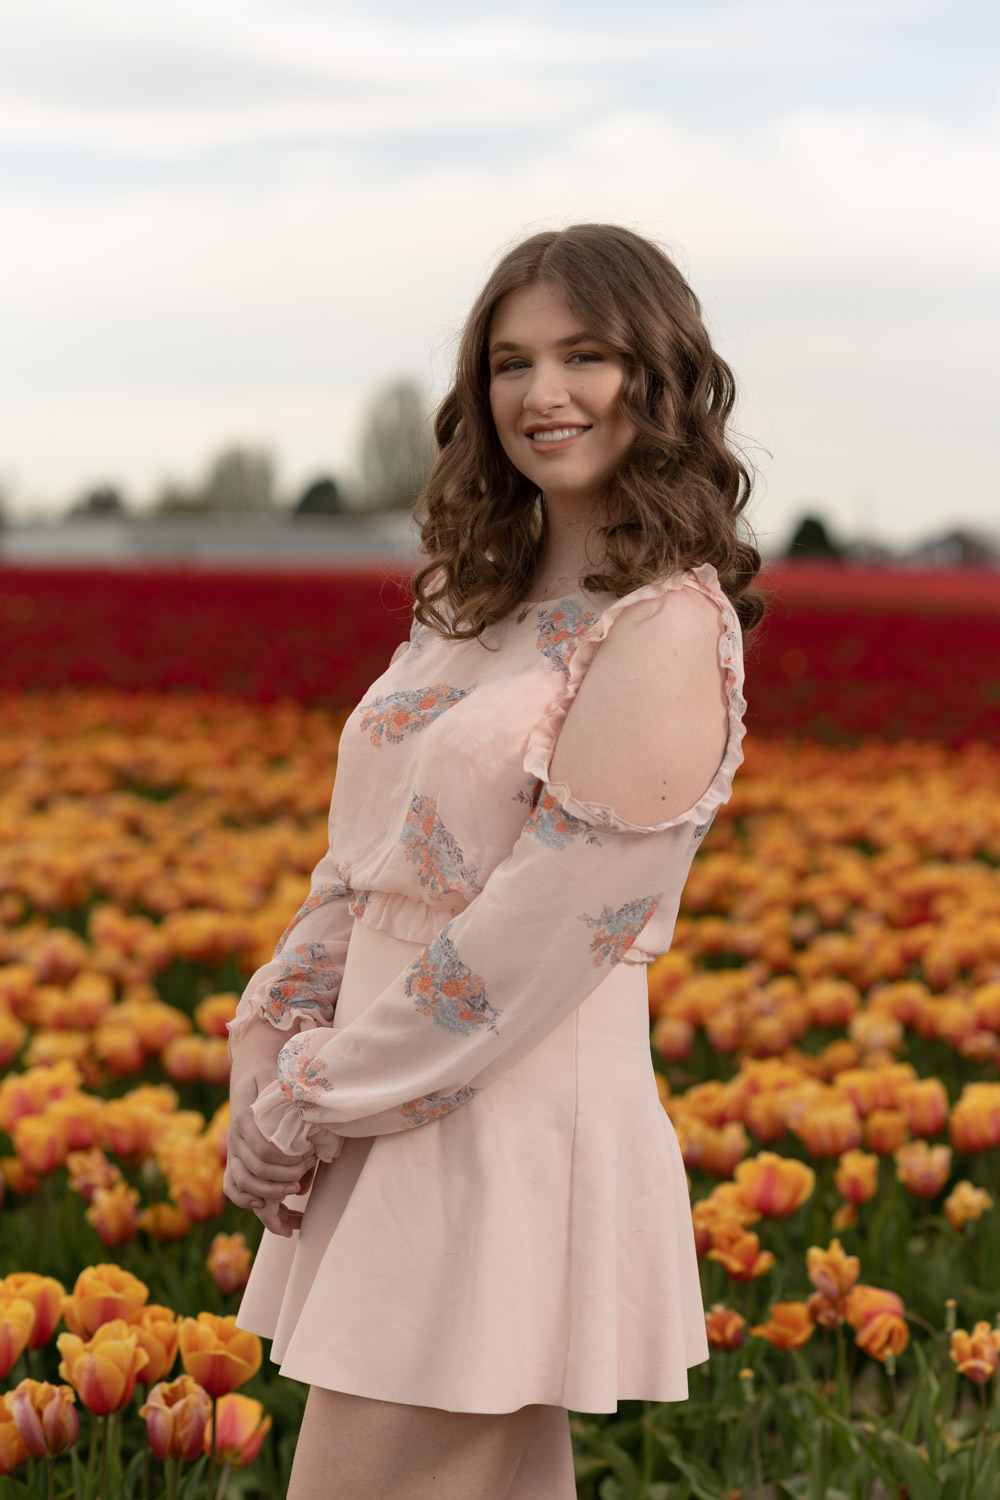 Smiling lady wearing a pant suit with tulips and blurred tree line in background.